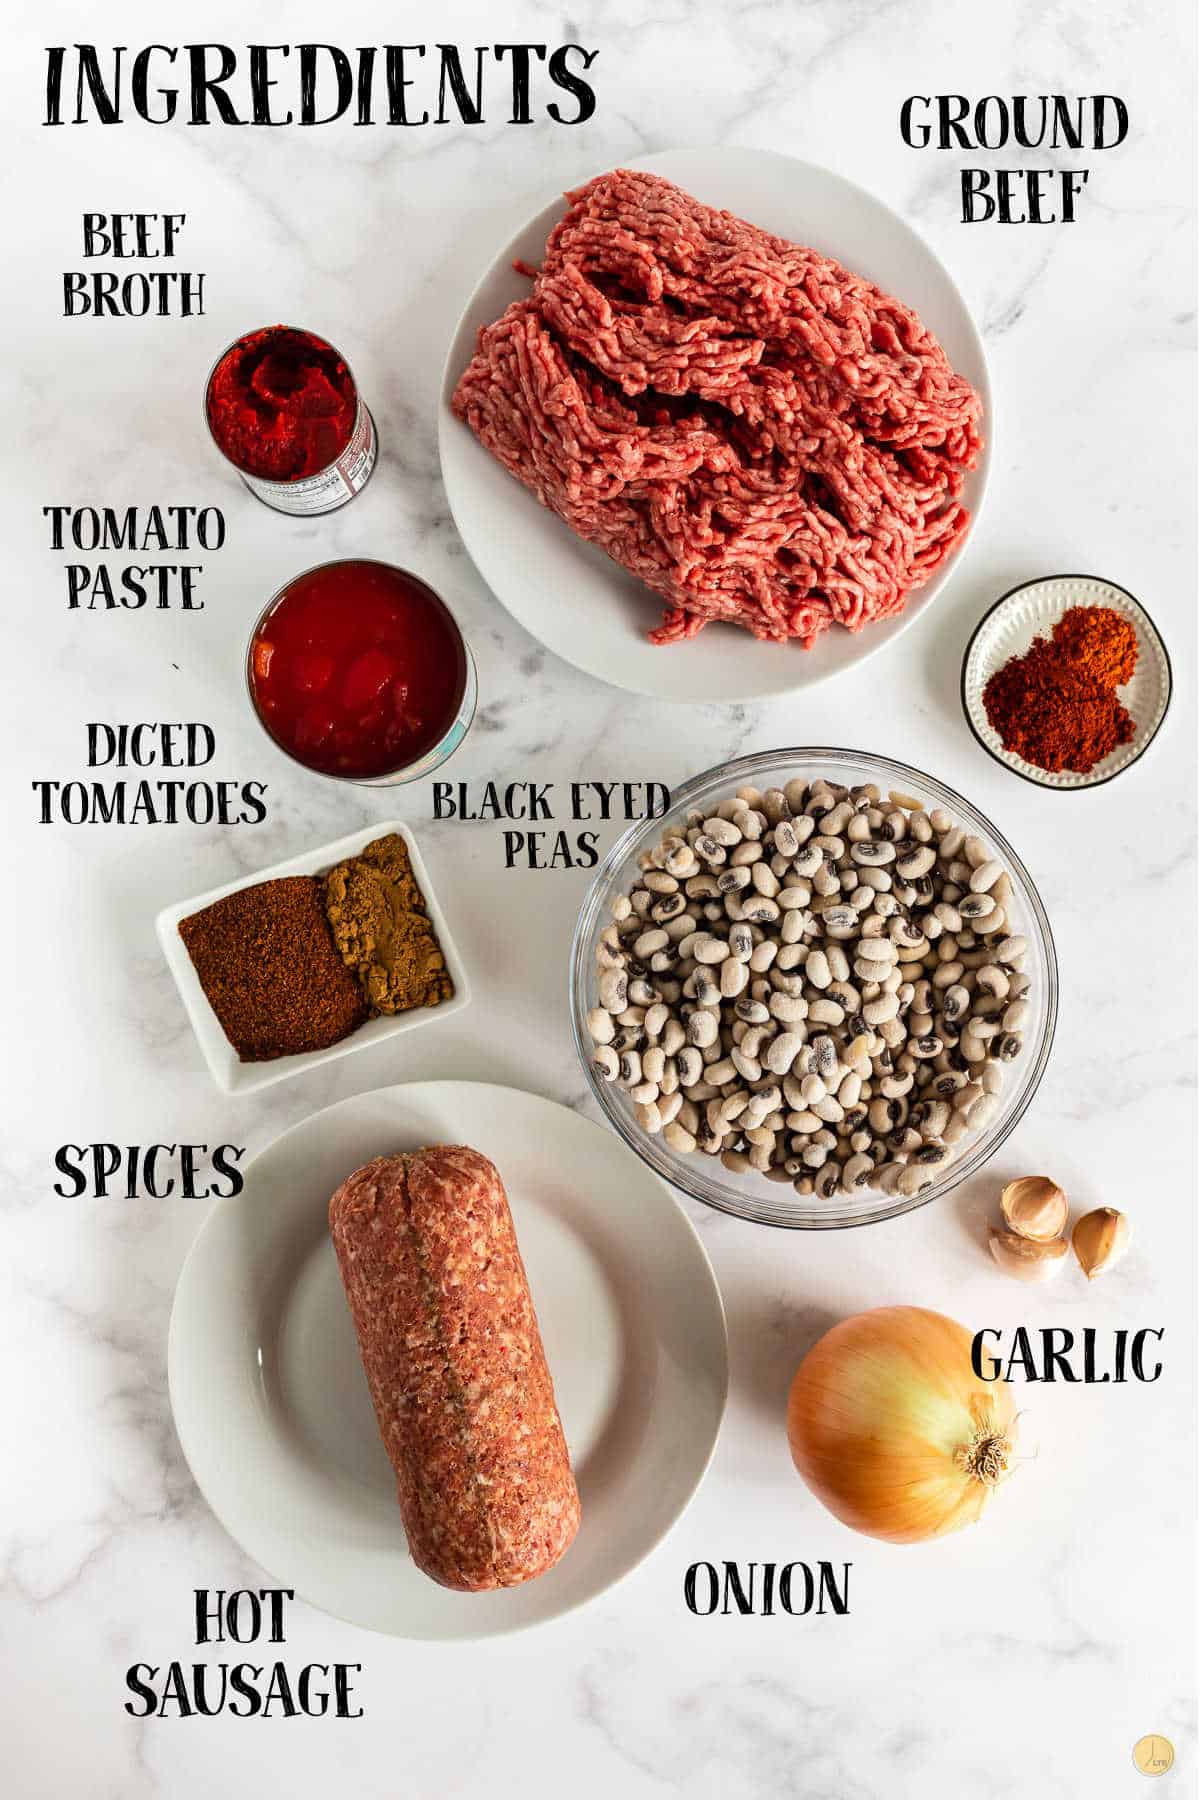 labeled picture of chili ingredients on a cold day